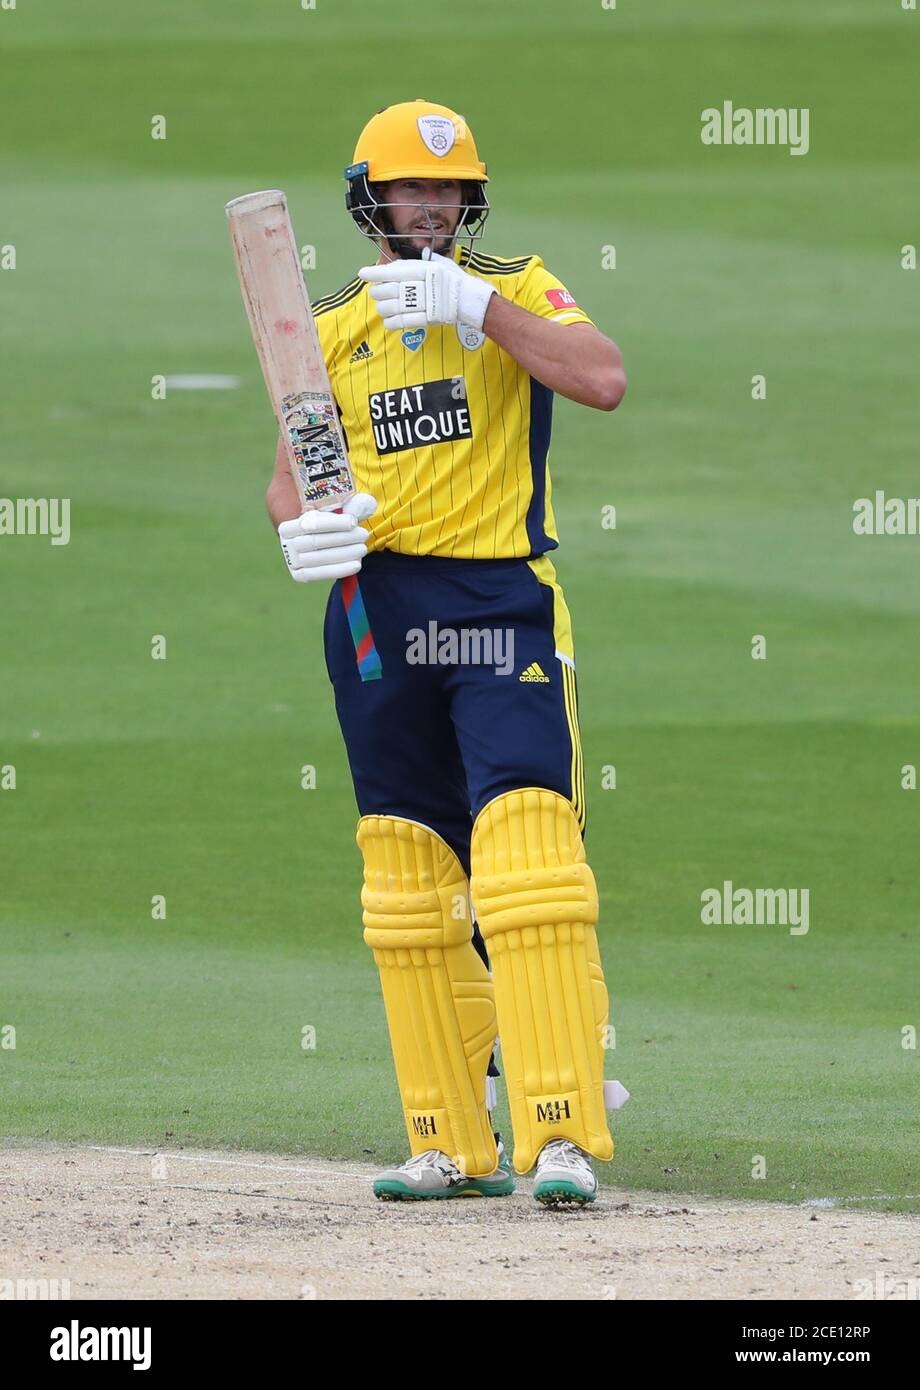 Hove, UK. 30th Aug, 2020. Hampshire's James Fuller batting during the Vitality Blast T20 match between Sussex Sharks and Hampshire at The 1st Central County Ground, Hove Credit: James Boardman/Alamy Live News Stock Photo